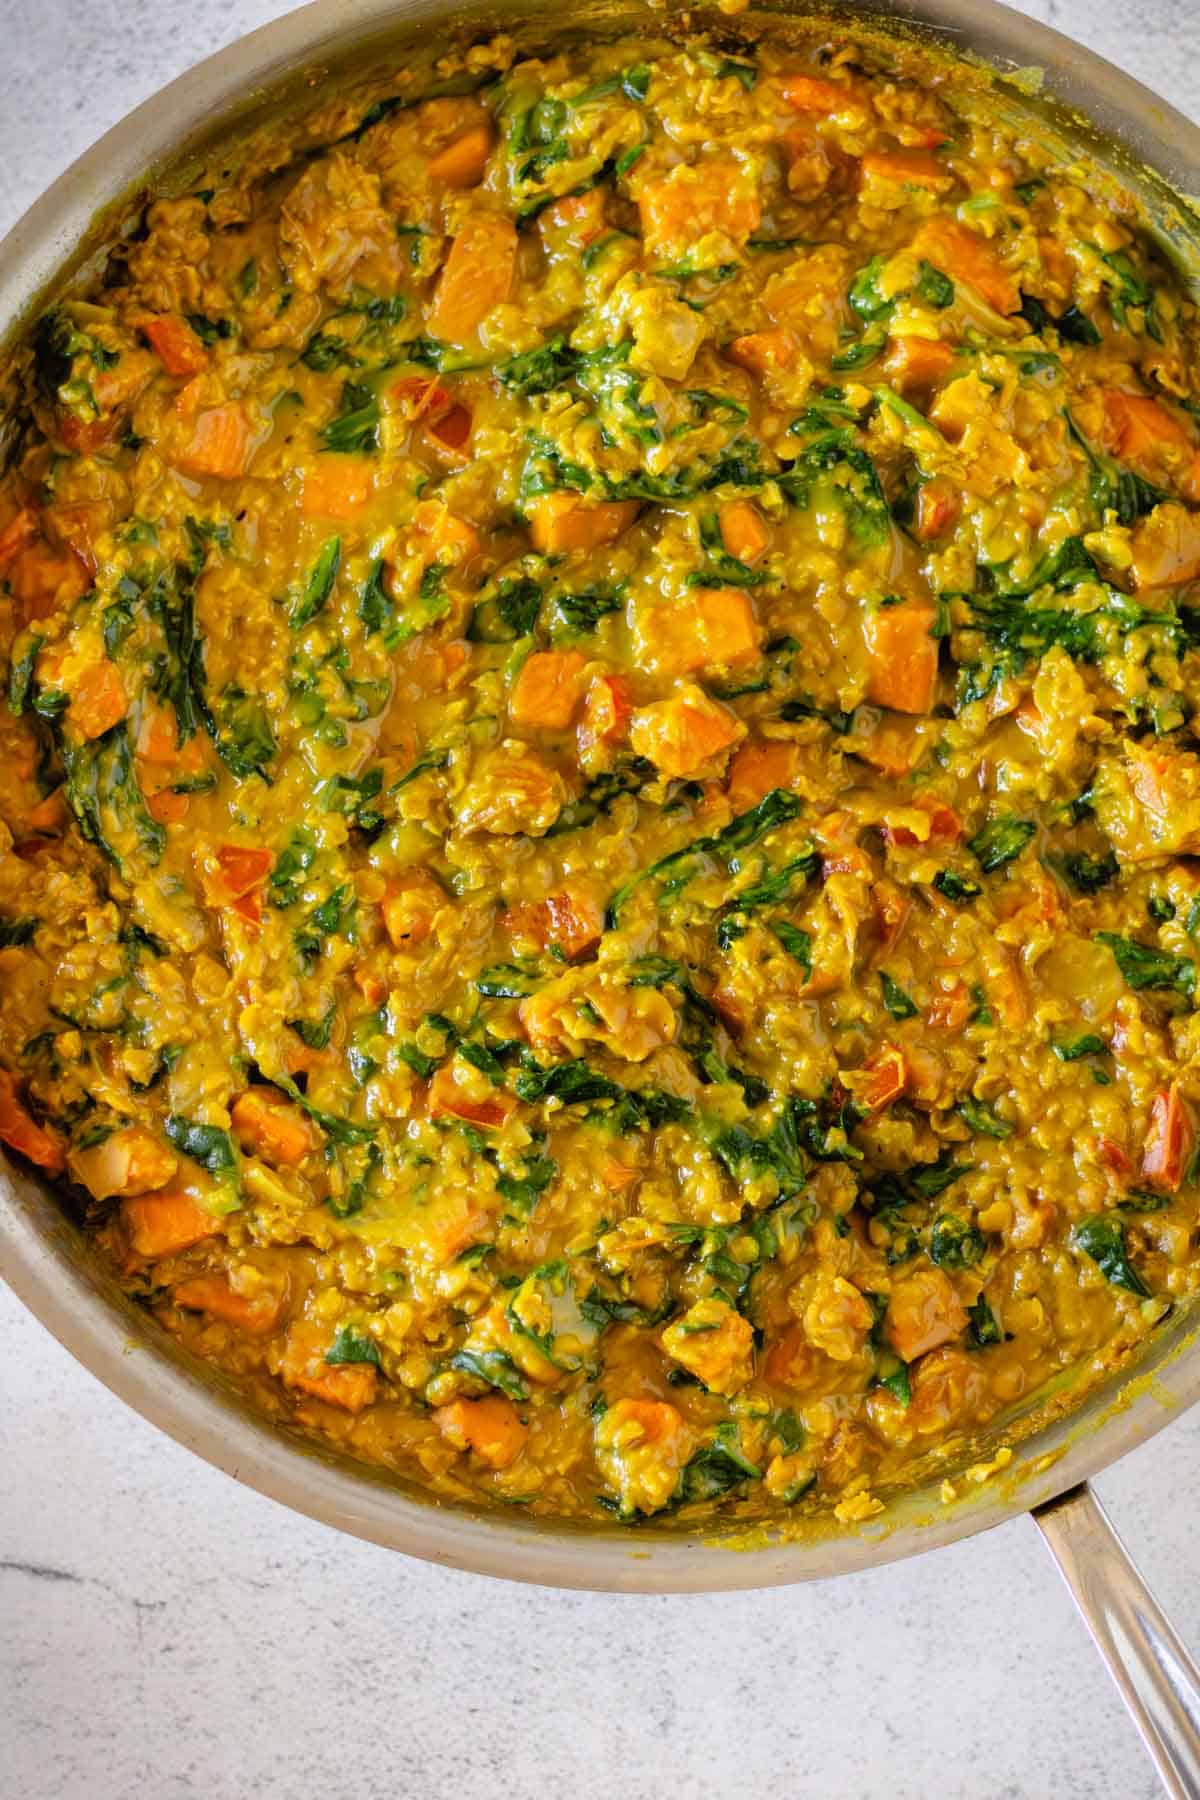 Red lentil curry with sweet potatoes and spinach in a skillet.